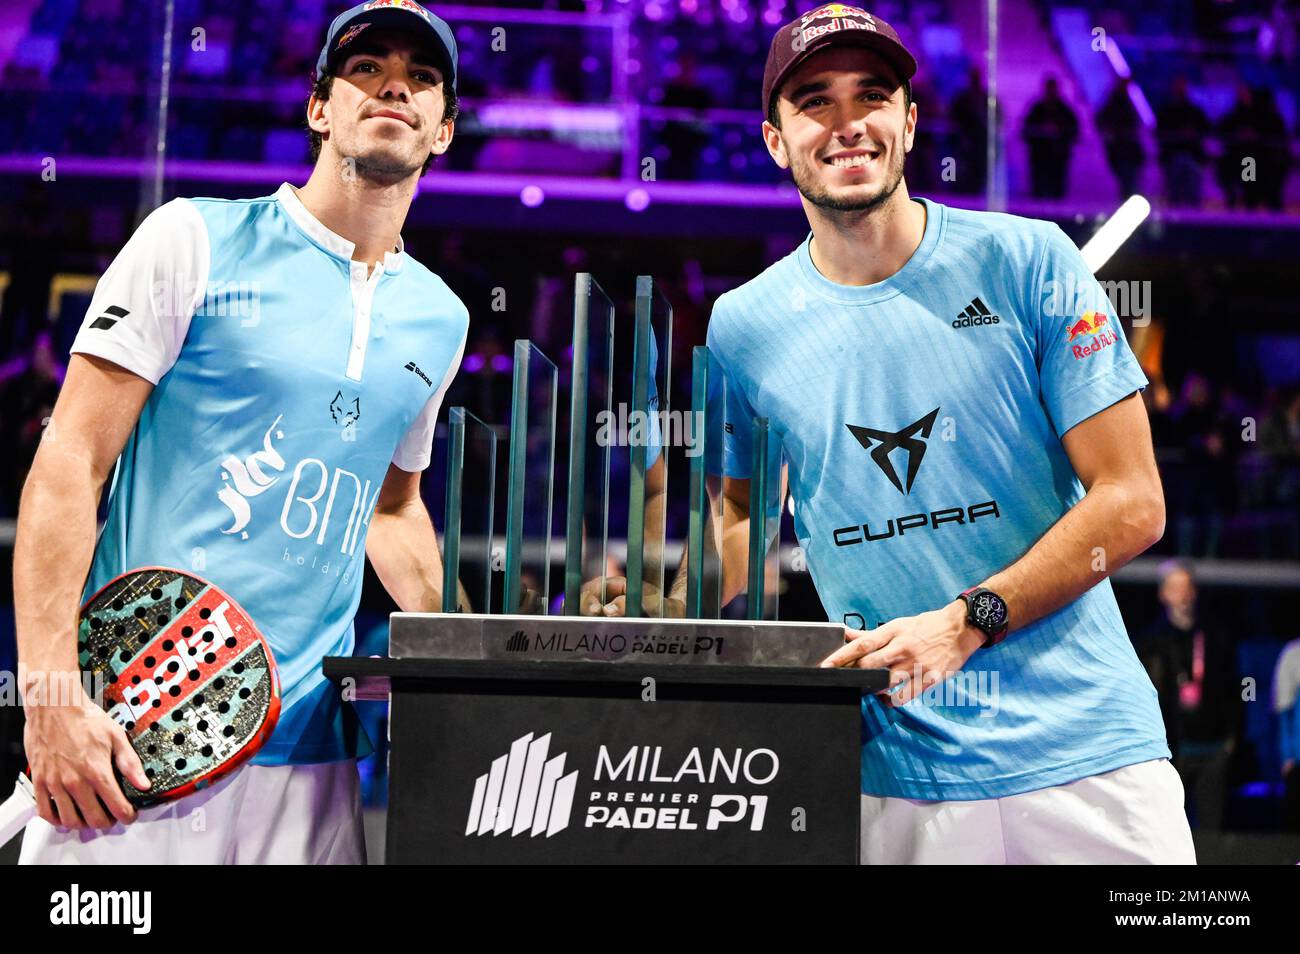 Milan, Italy. 11 December, 2022. Juan Lebron of Spain with Alejandro Galan  of Spain during the cerimony awards the Final of Milan Premier Padel P1  2022 celebrated at Allianz Cloud on December